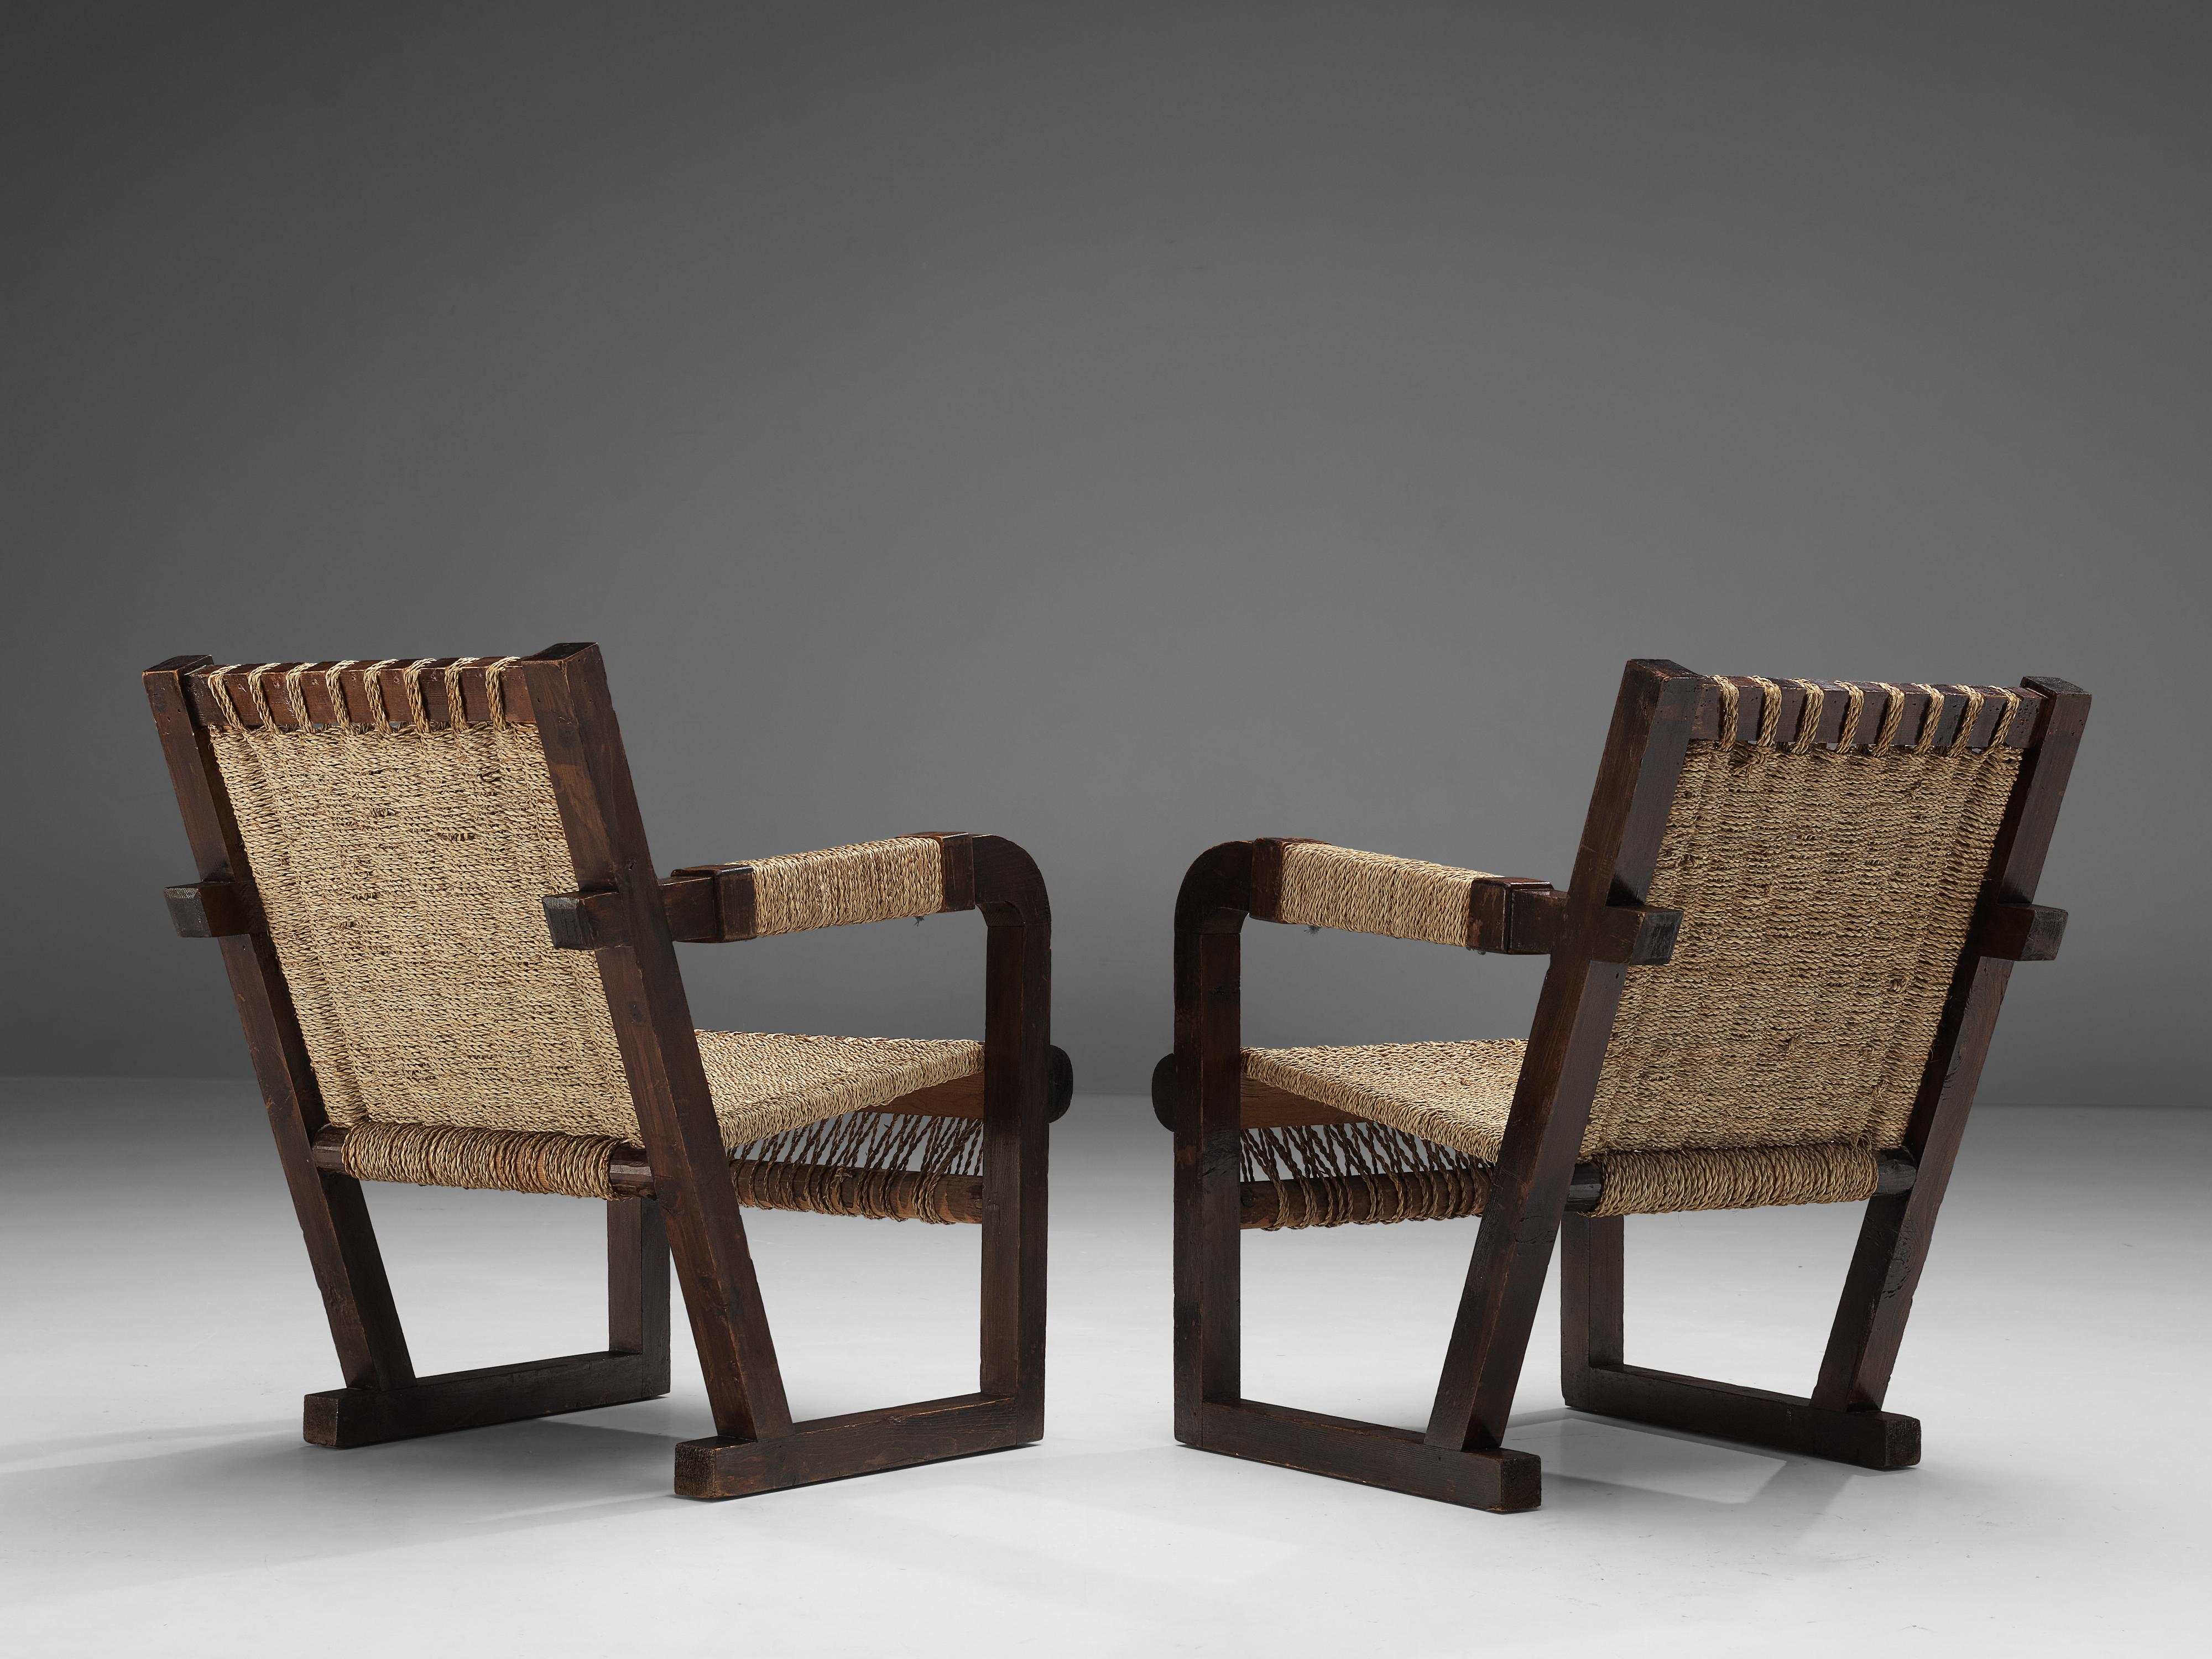 Mid-20th Century Francis Jourdain Pair of Lounge Chair with Woven Details